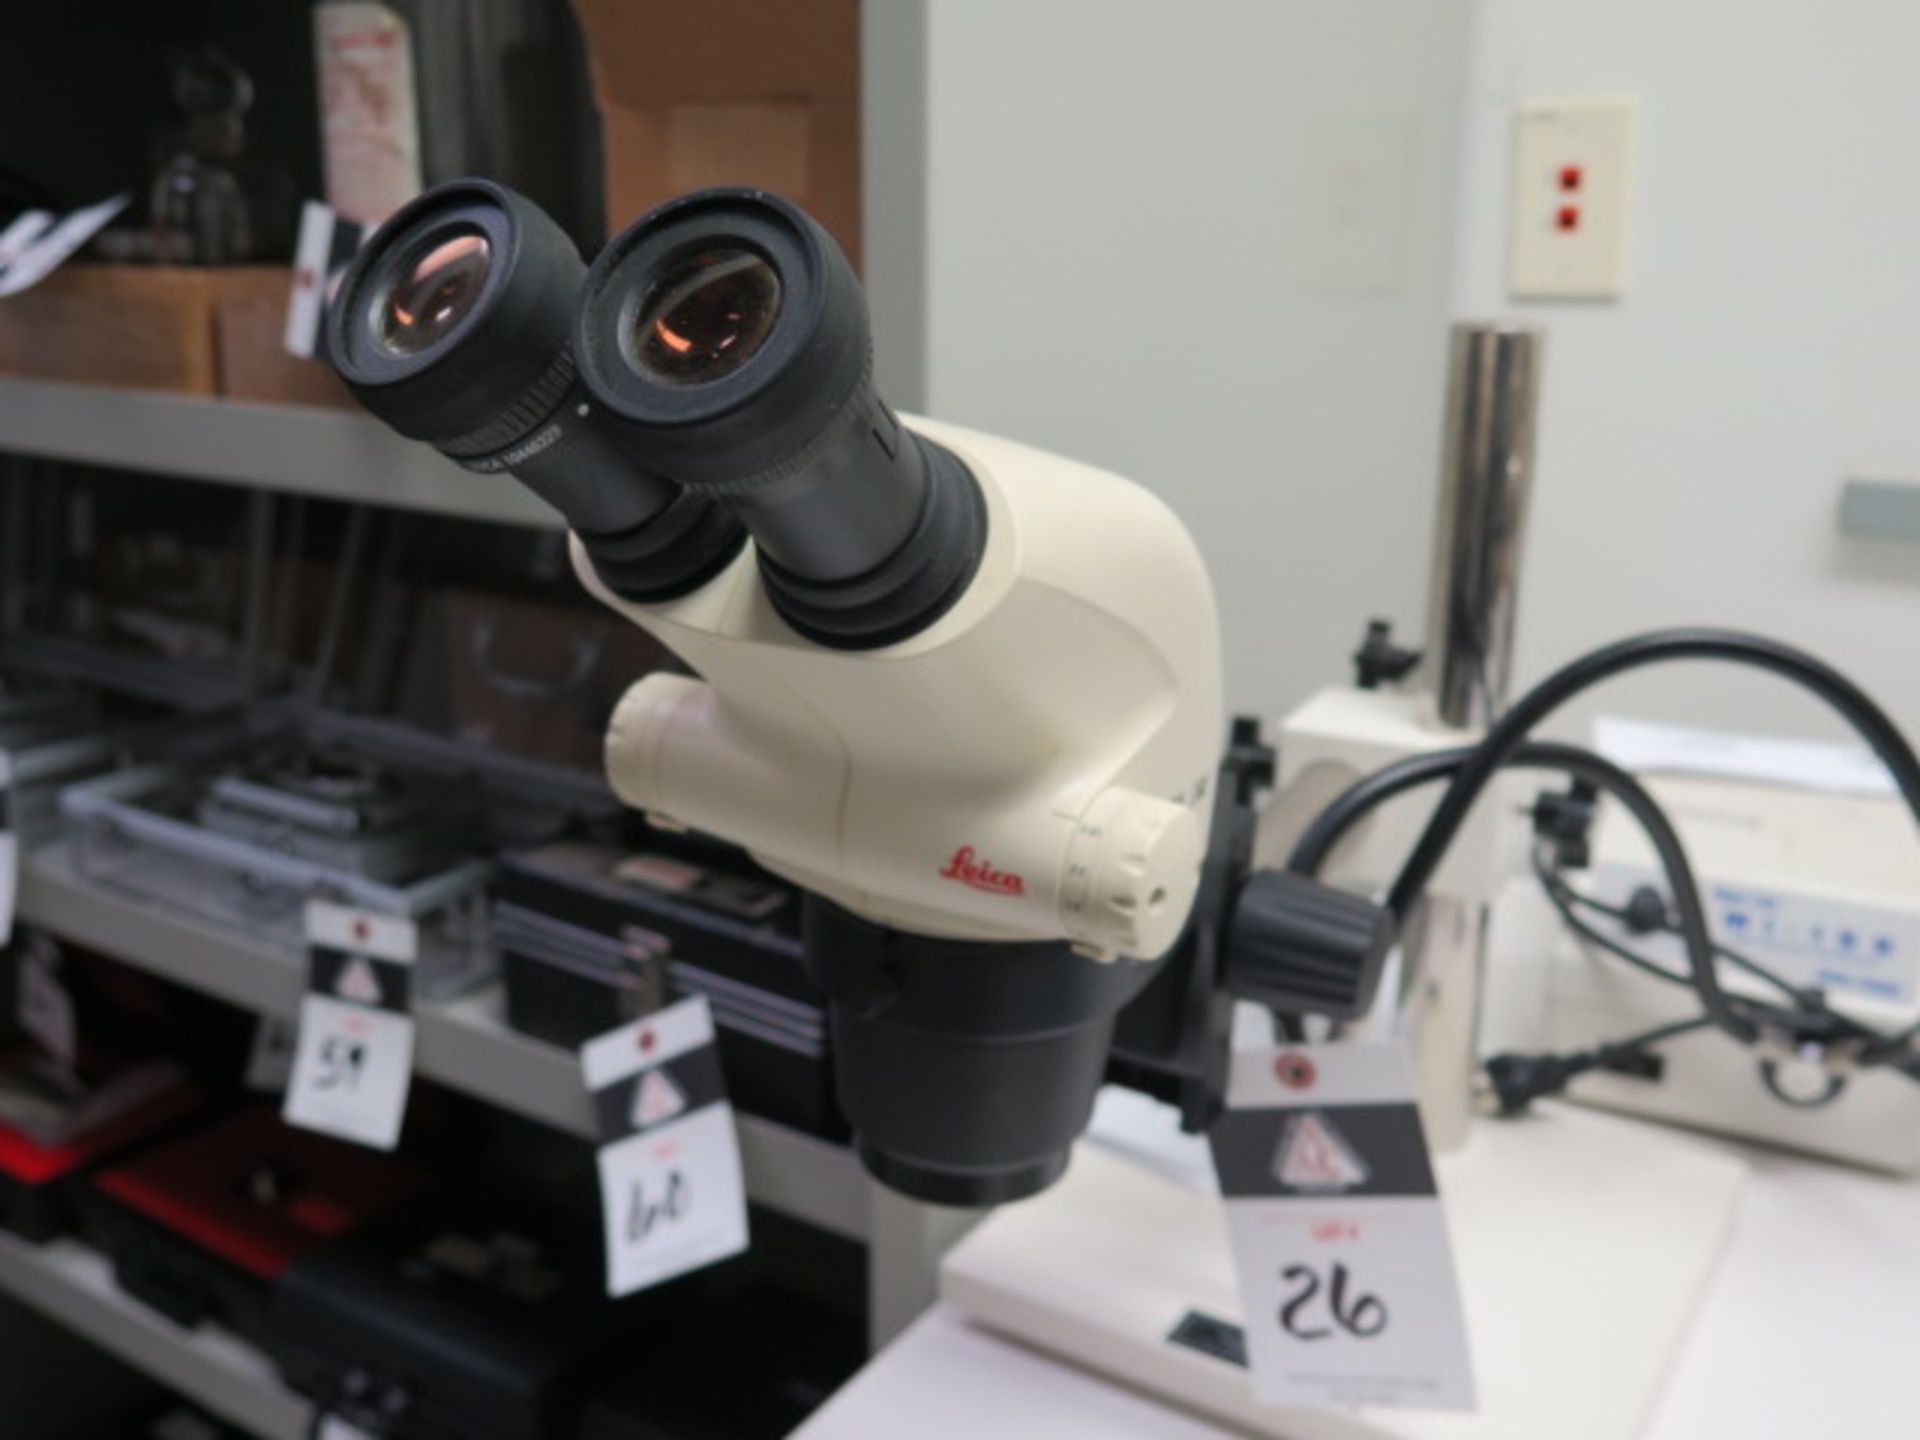 Leica S6E Stereo Microscope w/ Dolan-Jenner Fiber-Light Source (SOLD AS-IS - NO WARRANTY) - Image 2 of 8